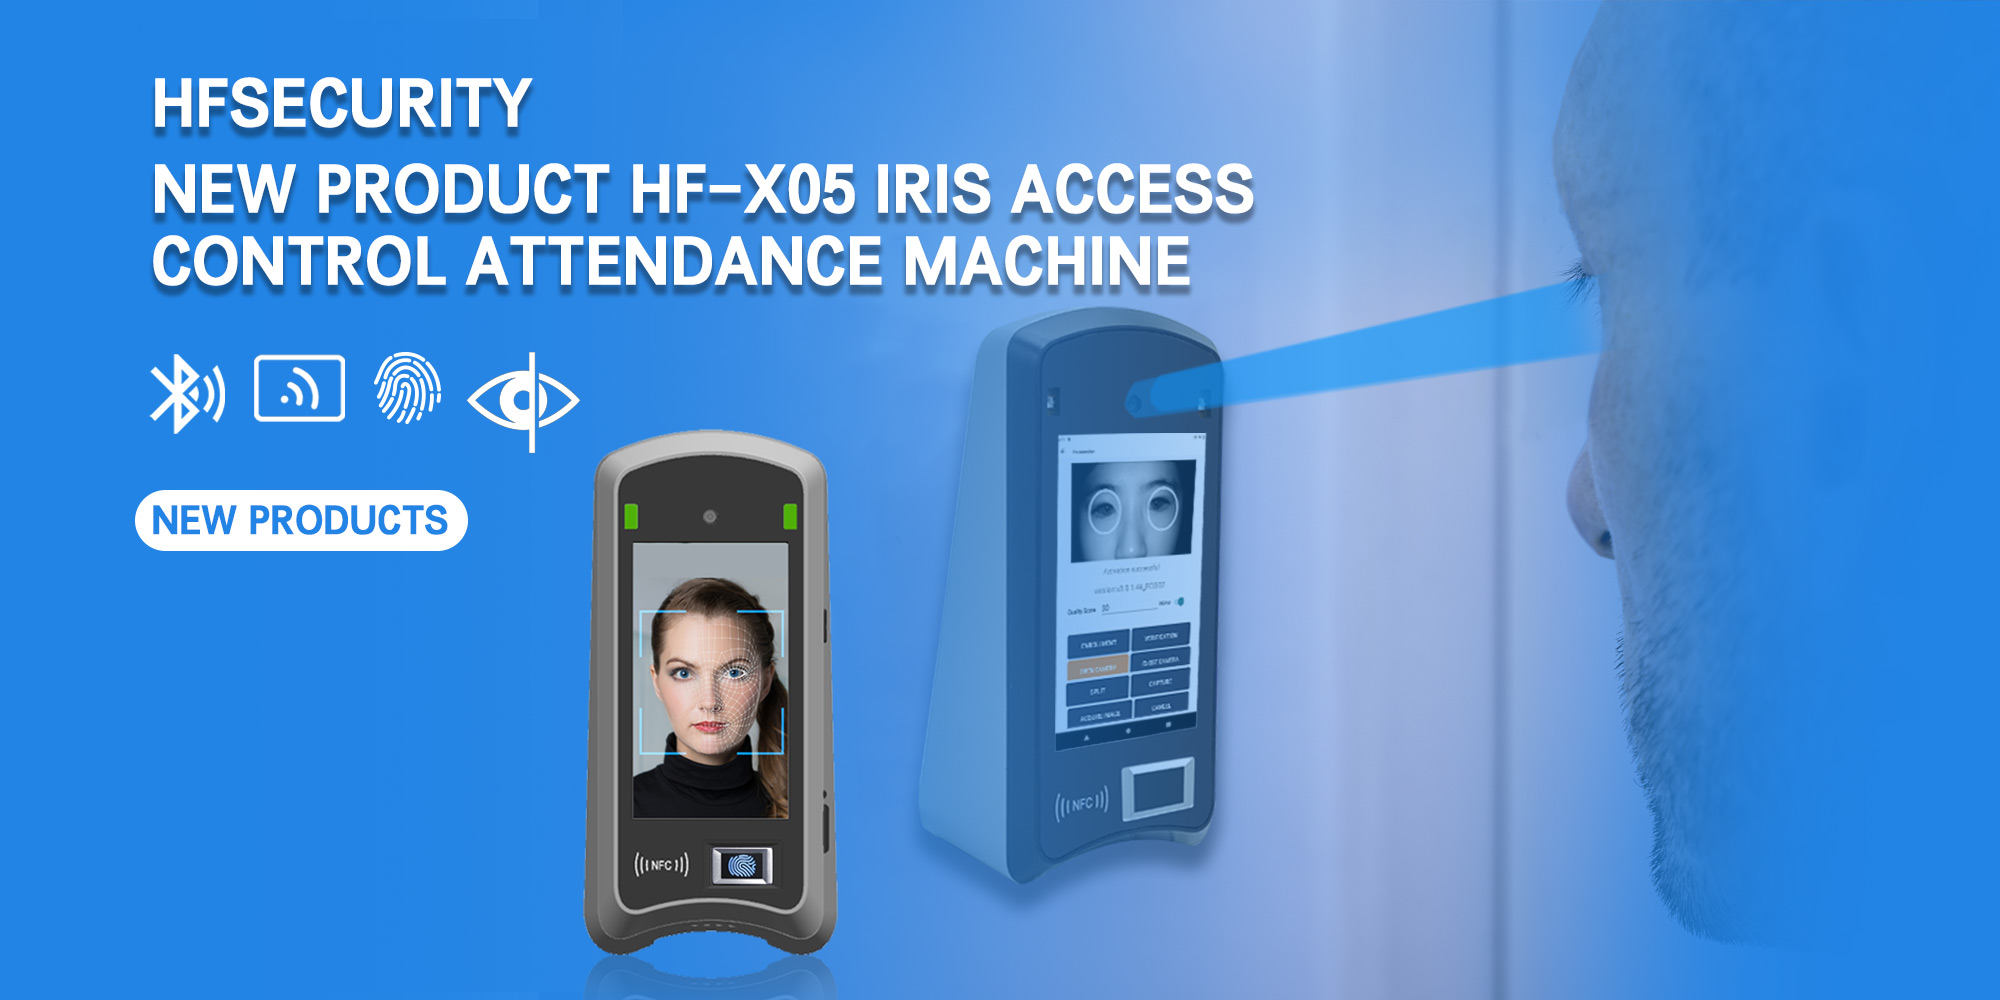 iris access and Attendance system